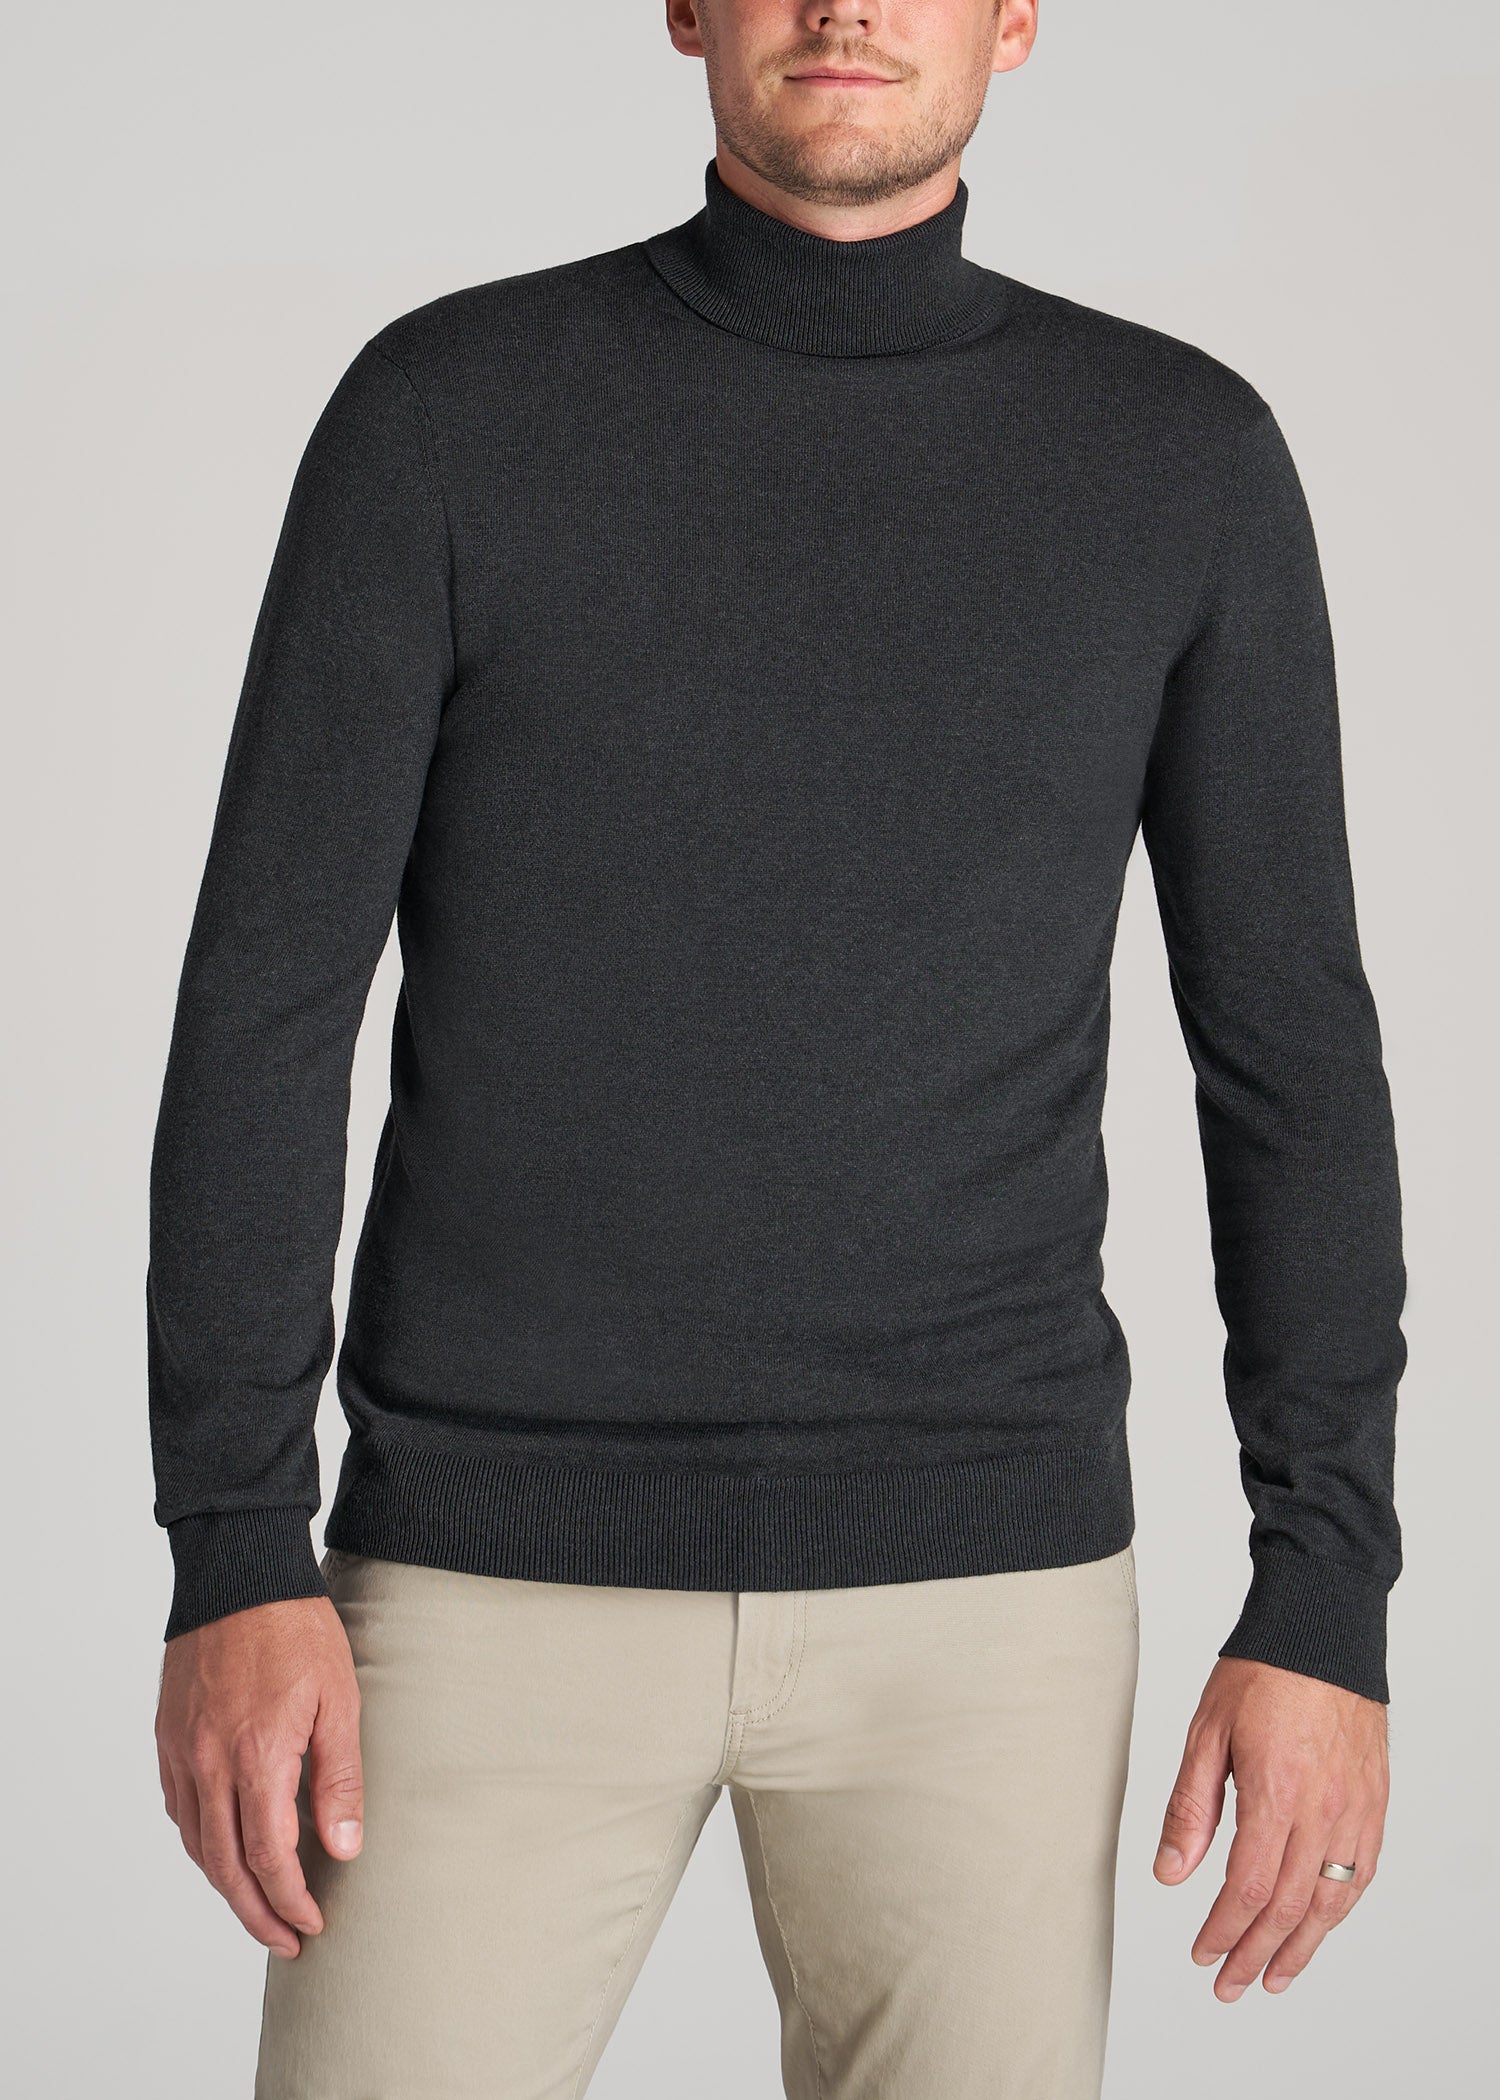 Men's Tall Turtleneck Sweater in Charcoal Mix